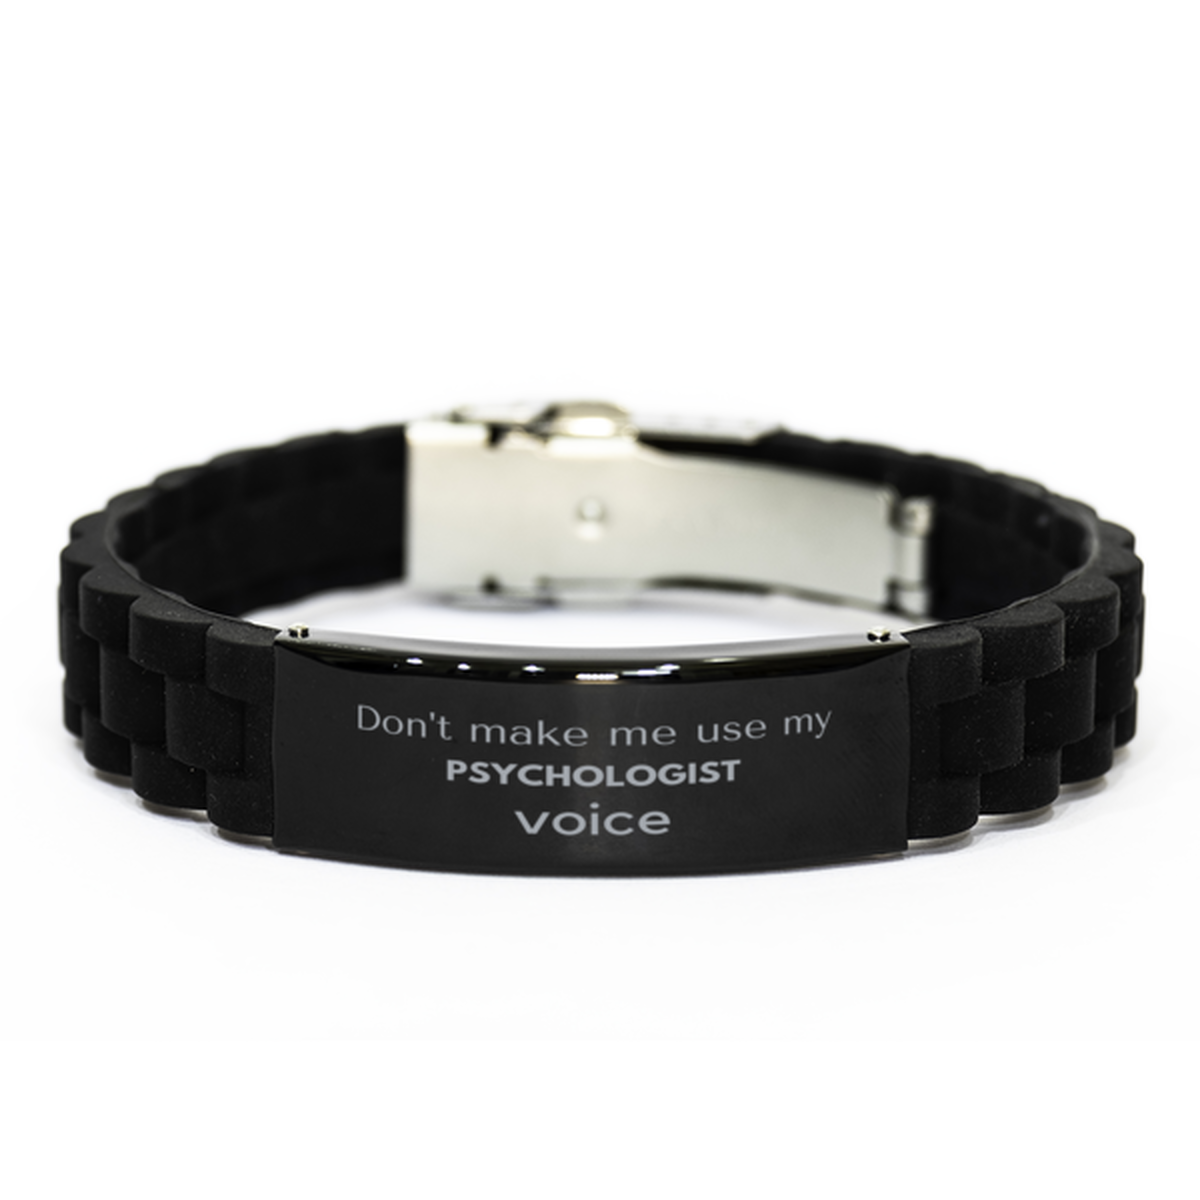 Don't make me use my Psychologist voice, Sarcasm Psychologist Gifts, Christmas Psychologist Black Glidelock Clasp Bracelet Birthday Unique Gifts For Psychologist Coworkers, Men, Women, Colleague, Friends